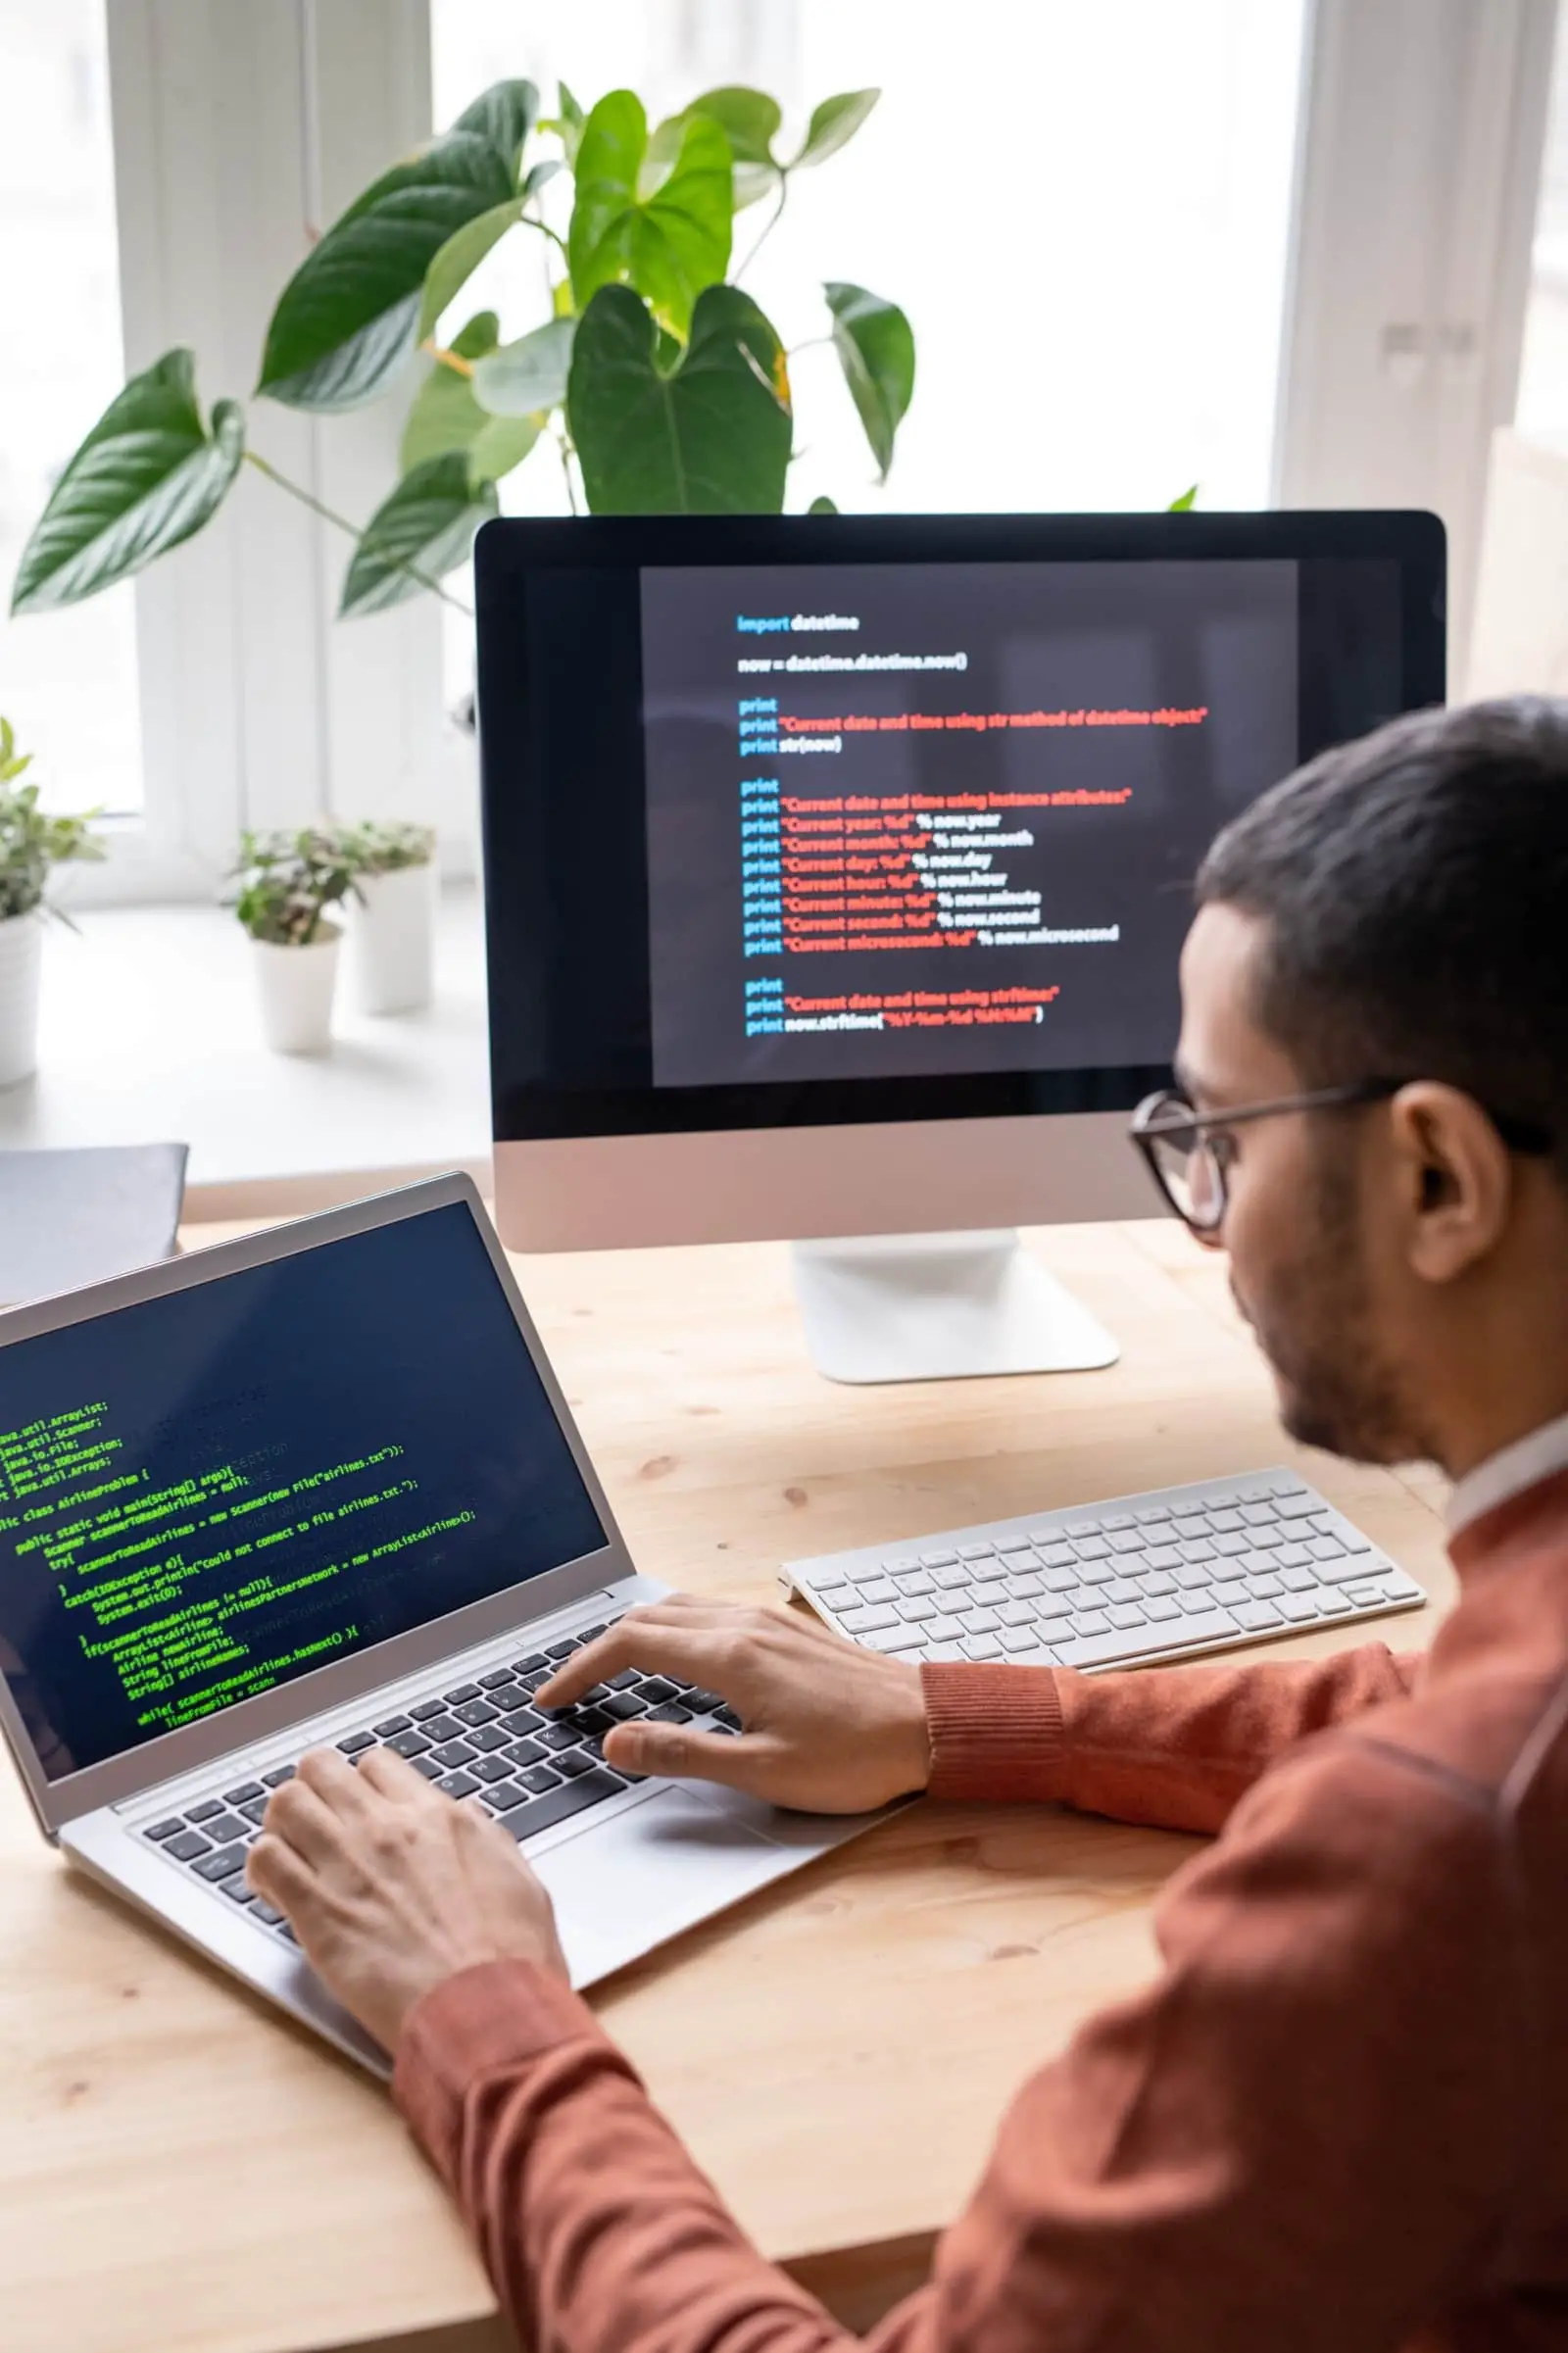 How to Get Remote Web Developer Jobs in 2021